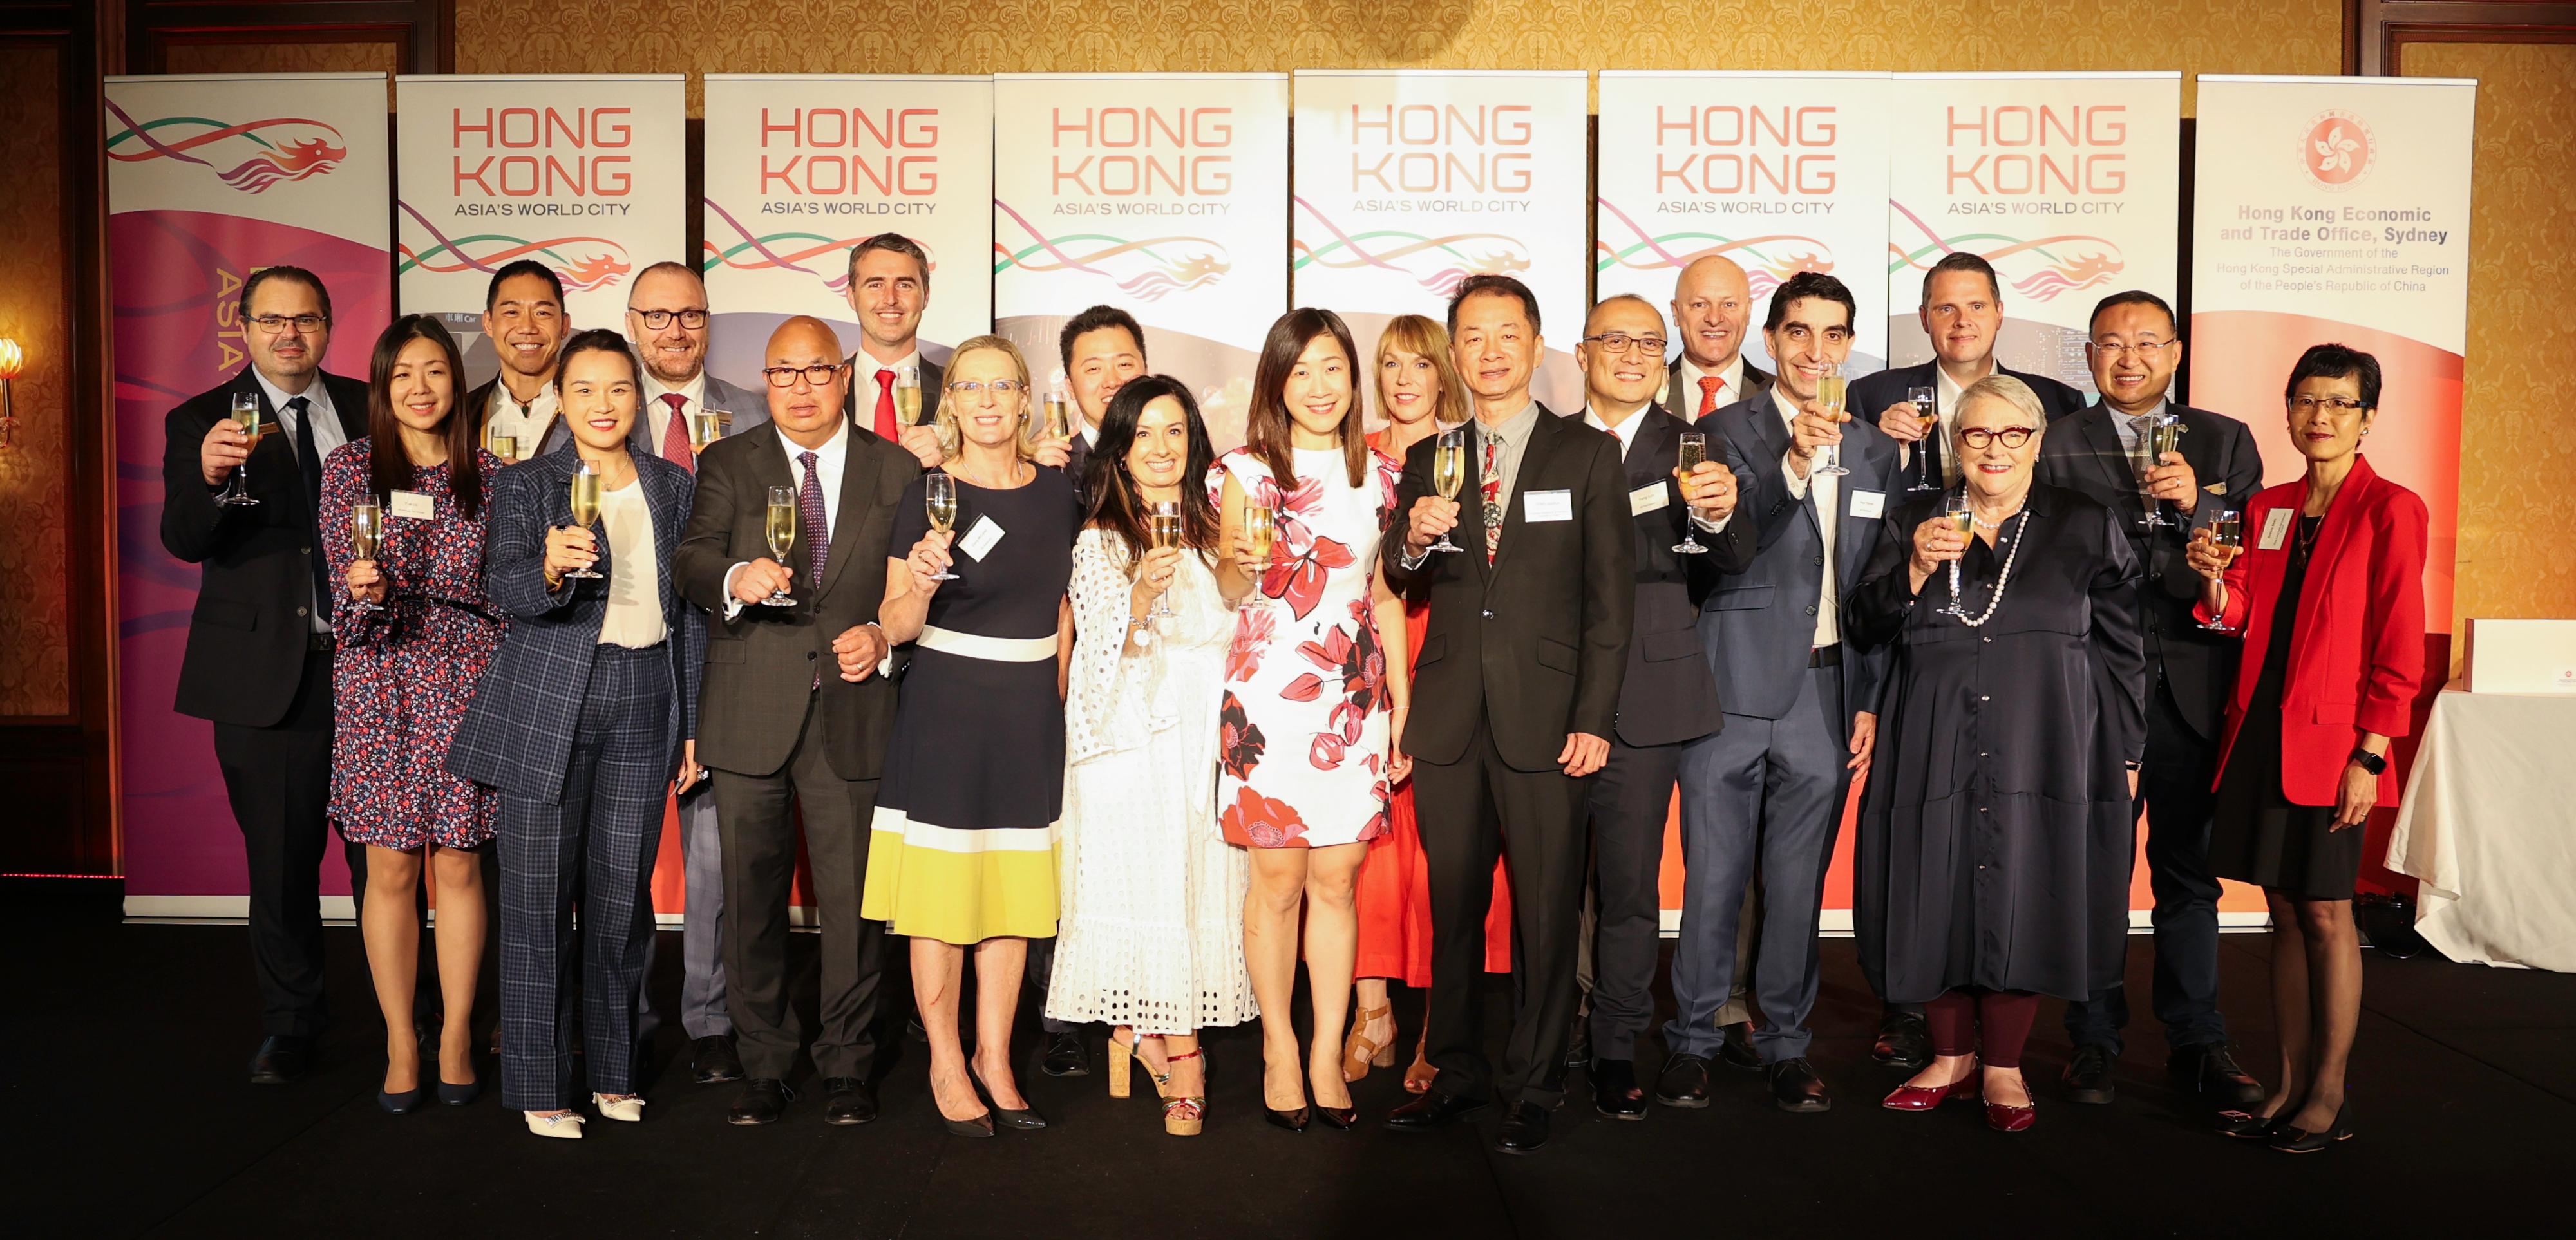 The Hong Kong Economic and Trade Office, Sydney (Sydney ETO) hosted a reception in Melbourne, Australia, yesterday (February 15) to celebrate Chinese New Year. Photo shows the Director of the Sydney ETO, Miss Trista Lim (front row, centre); the Acting Consul General of the People’s Republic of China in Melbourne, Mr Zeng Jianhua (front row, fifth right); the Parliamentary Secretary for Economic Development, representing the Premier of Victoria, Mr Paul Hamer (front row, third right), and other guests hosting a toasting ceremony.